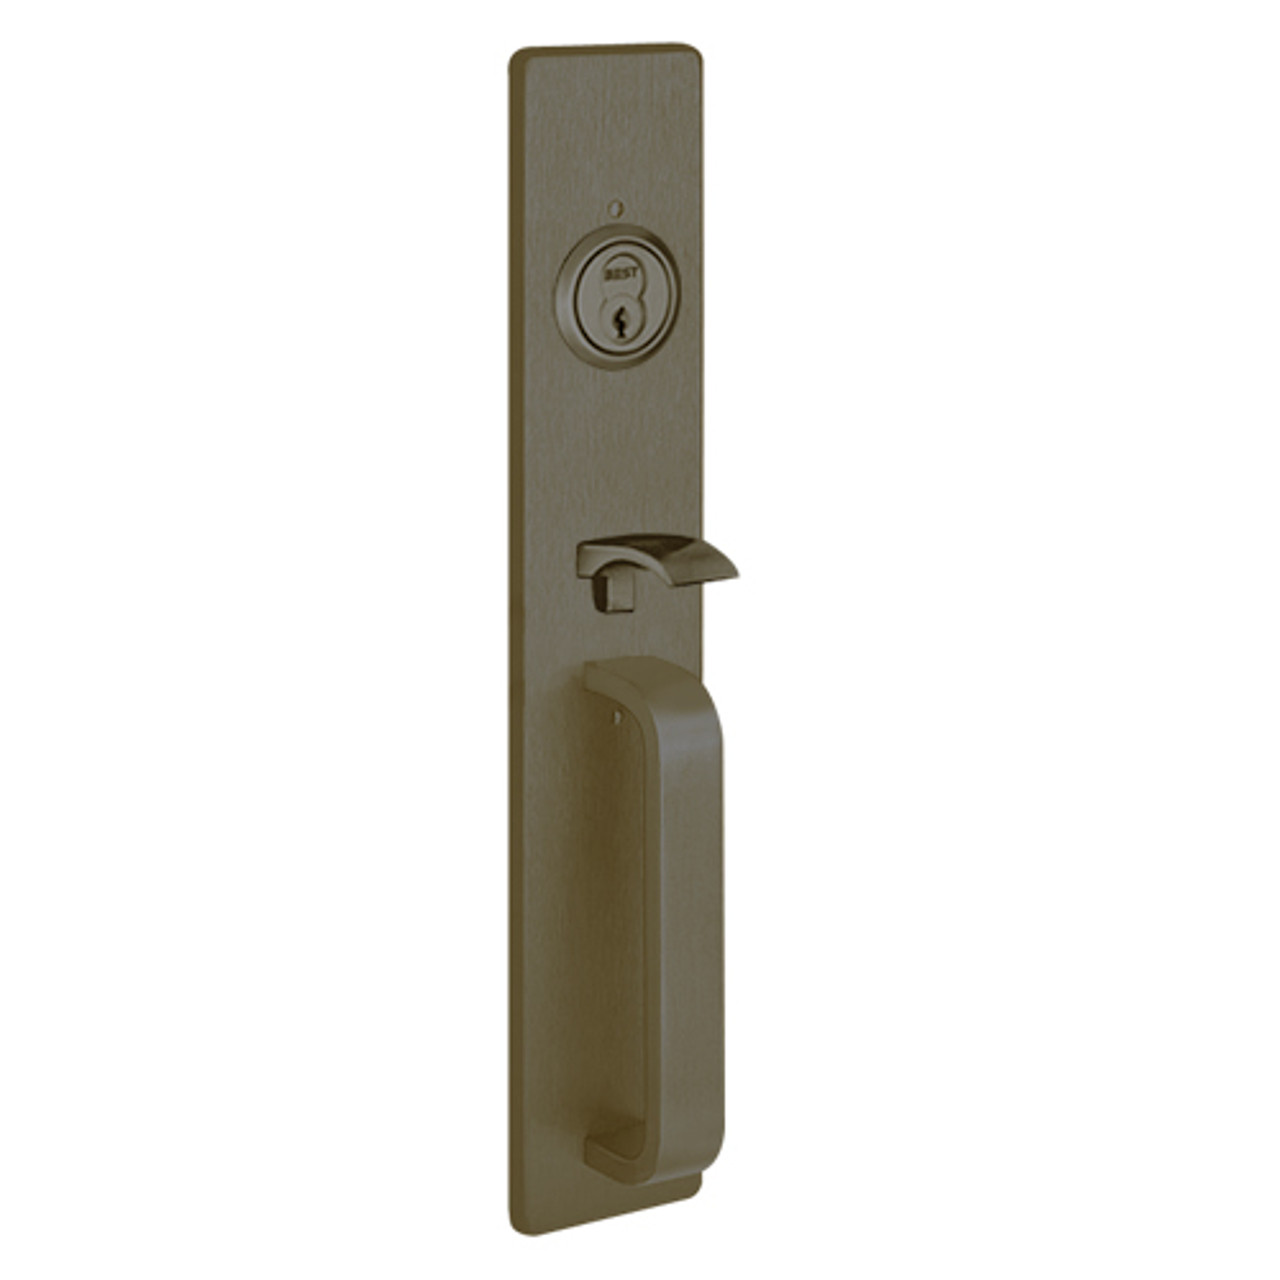 C1705A-613 PHI Key Controls Thumb Piece Trim with A Design Pull for Concealed Vertical Rod Device in Oil Rubbed Bronze Finish